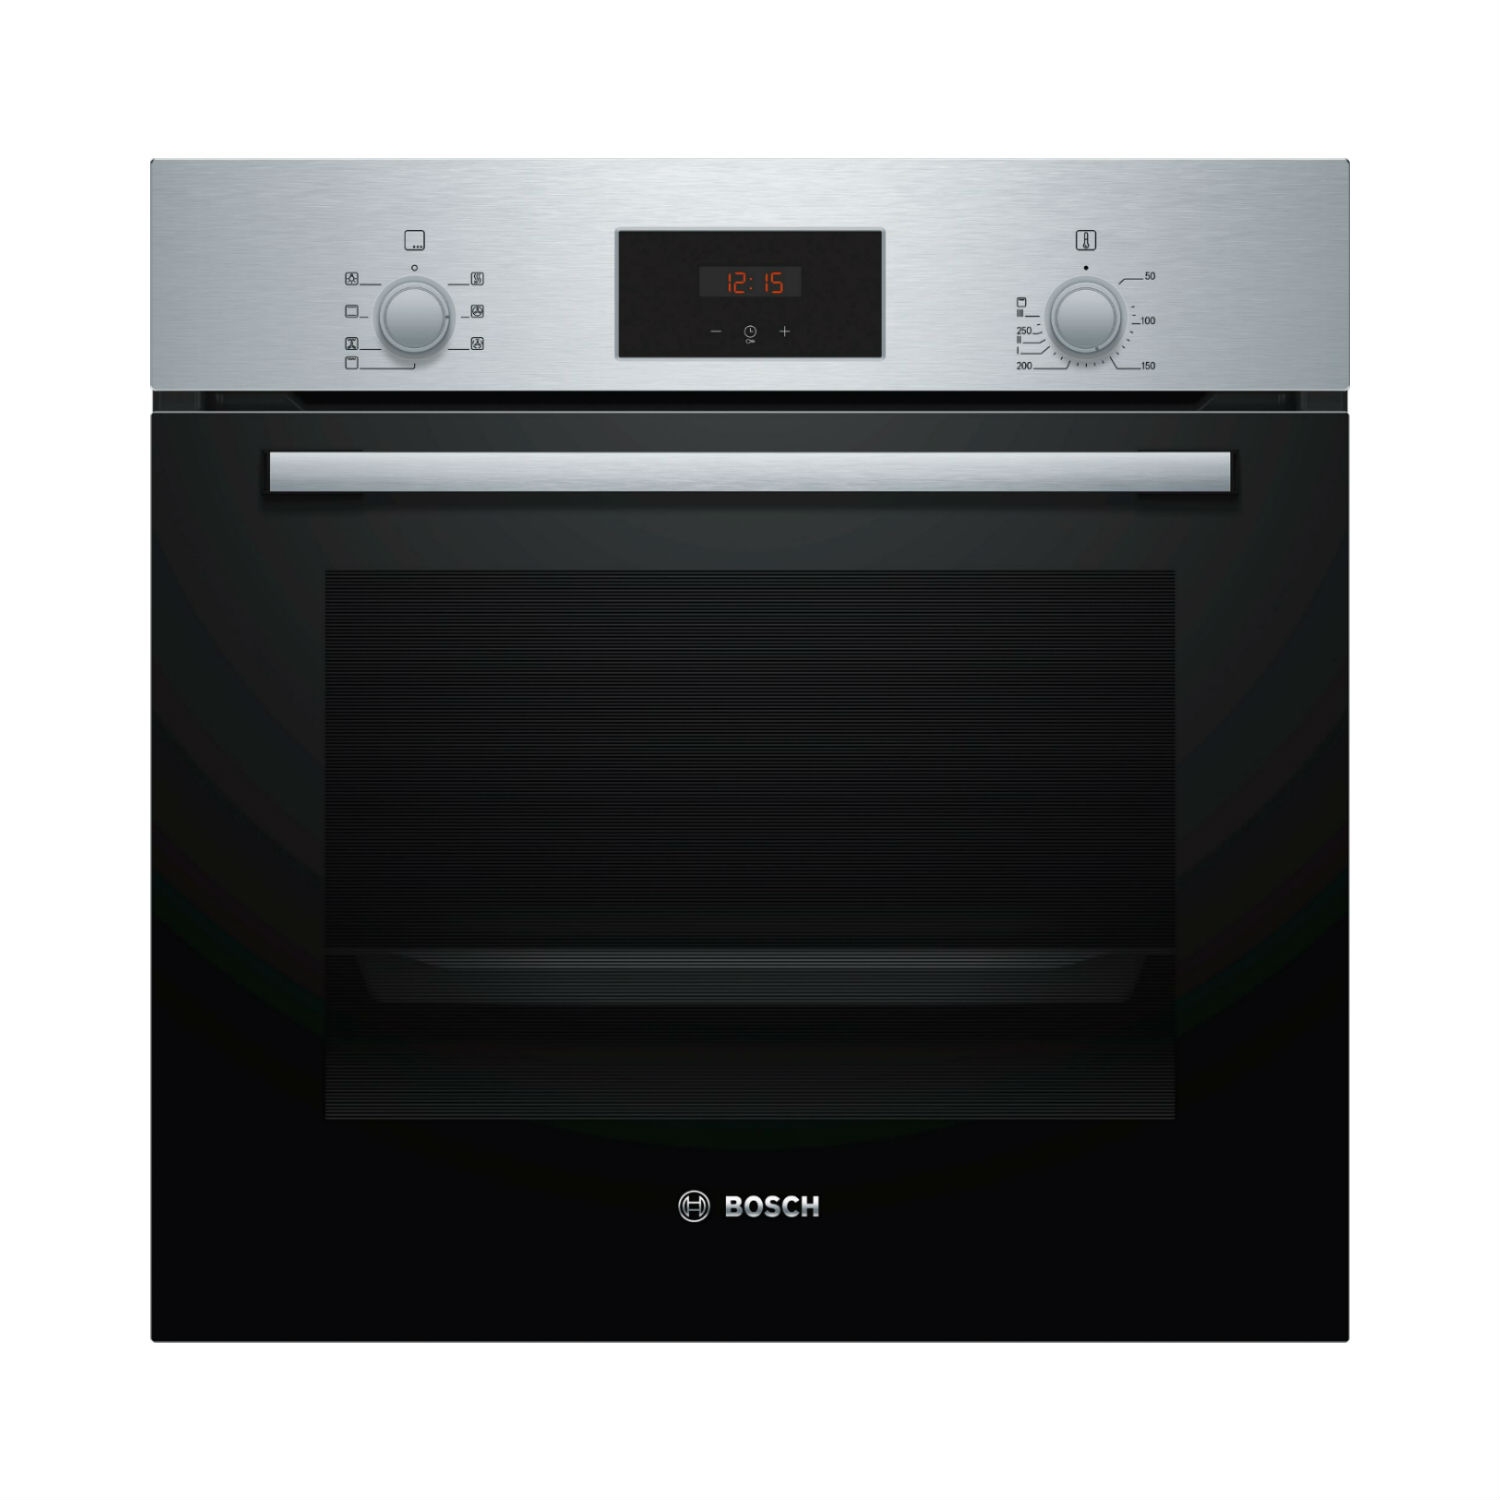 Bosch Built In Electric Single Oven - Stainless Steel - 0